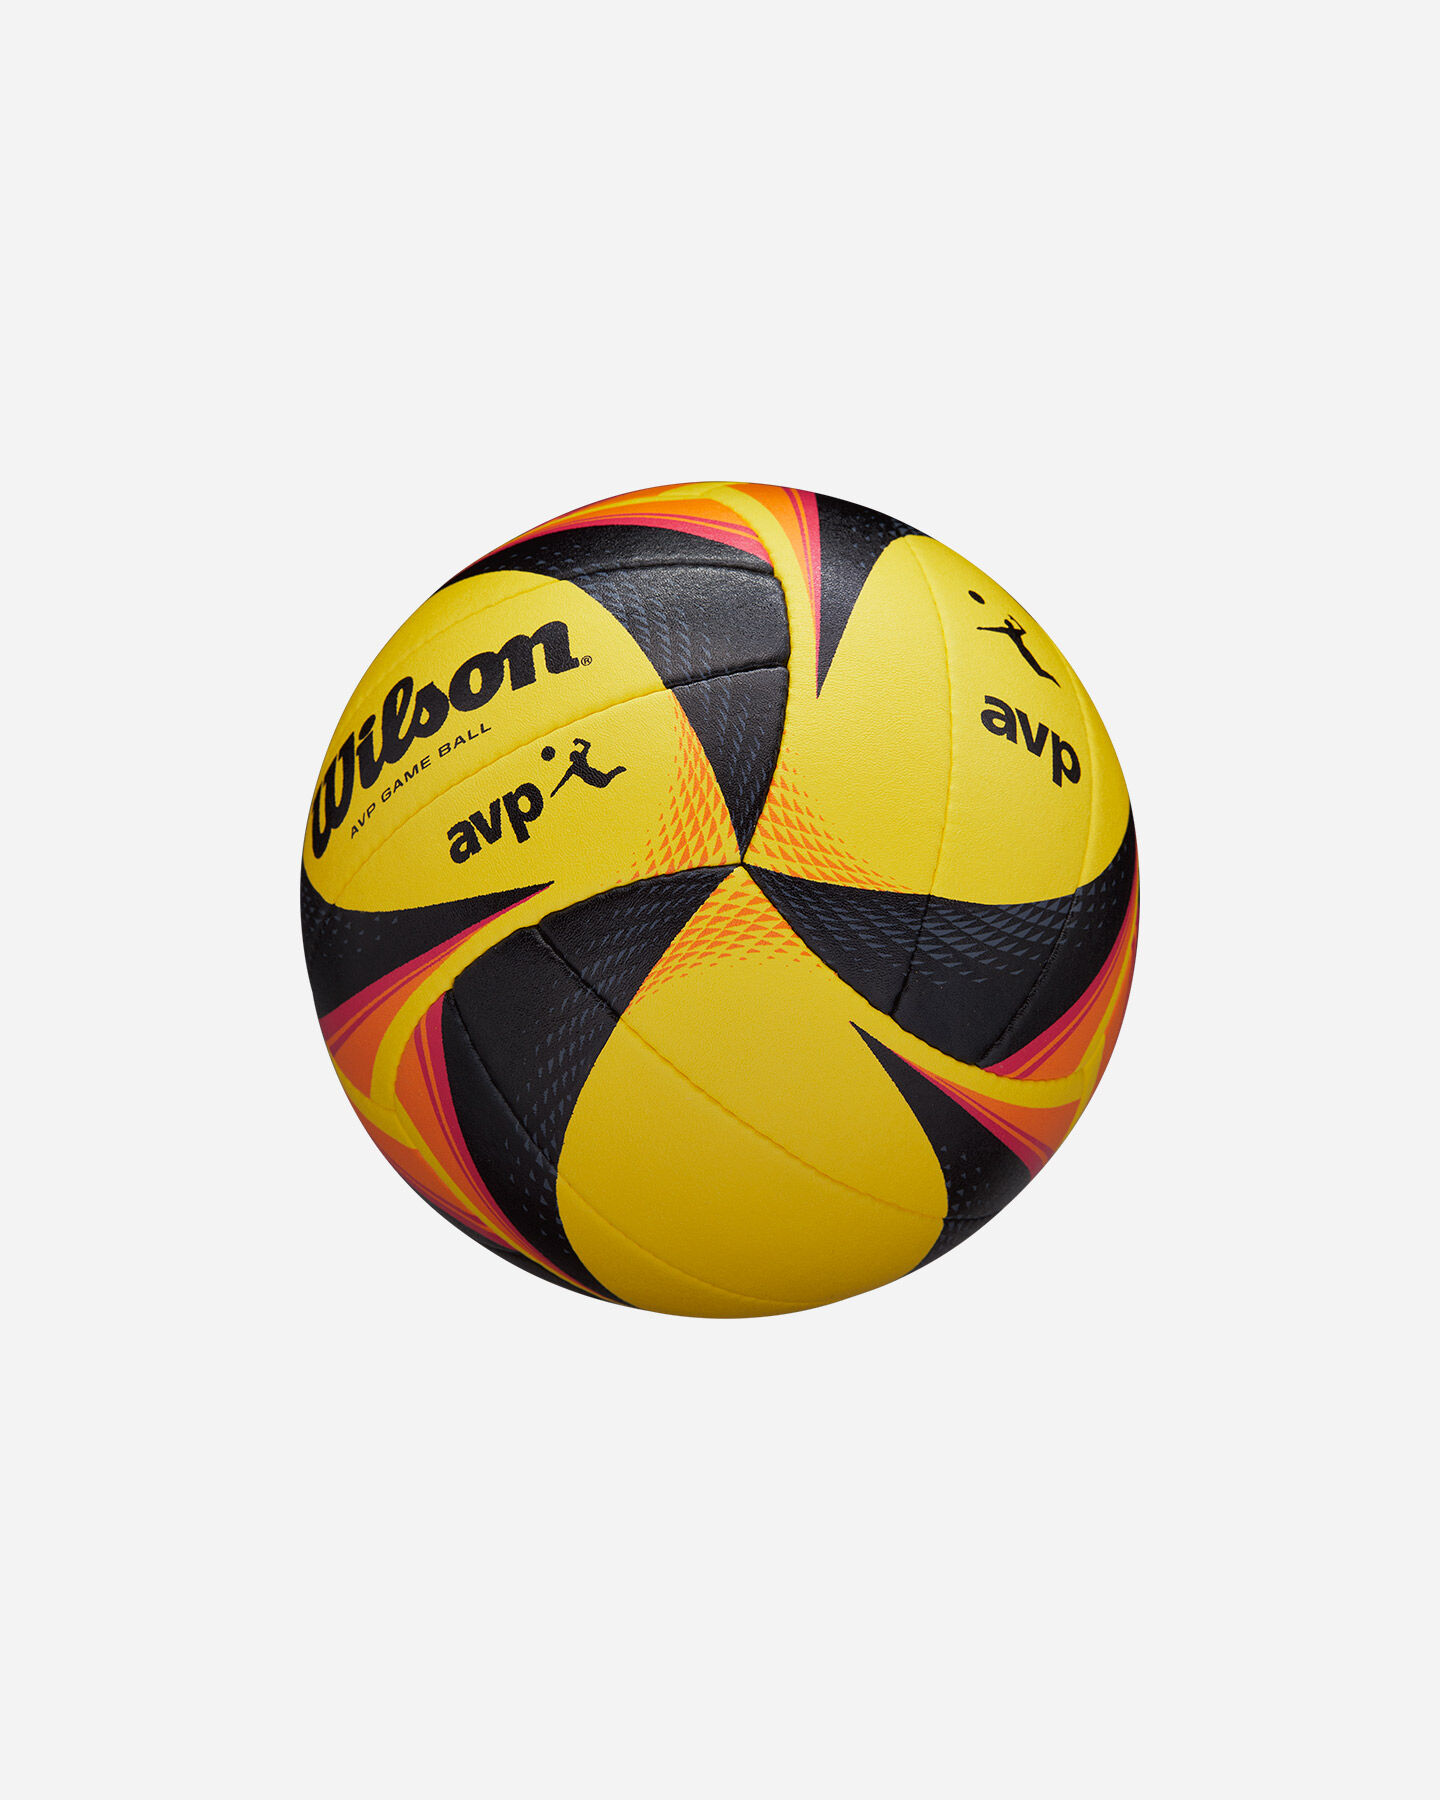  Pallone volley WILSON BEACH OPTX AVP OFFICIAL GB  S5440245|UNI|OFFICIAL scatto 3